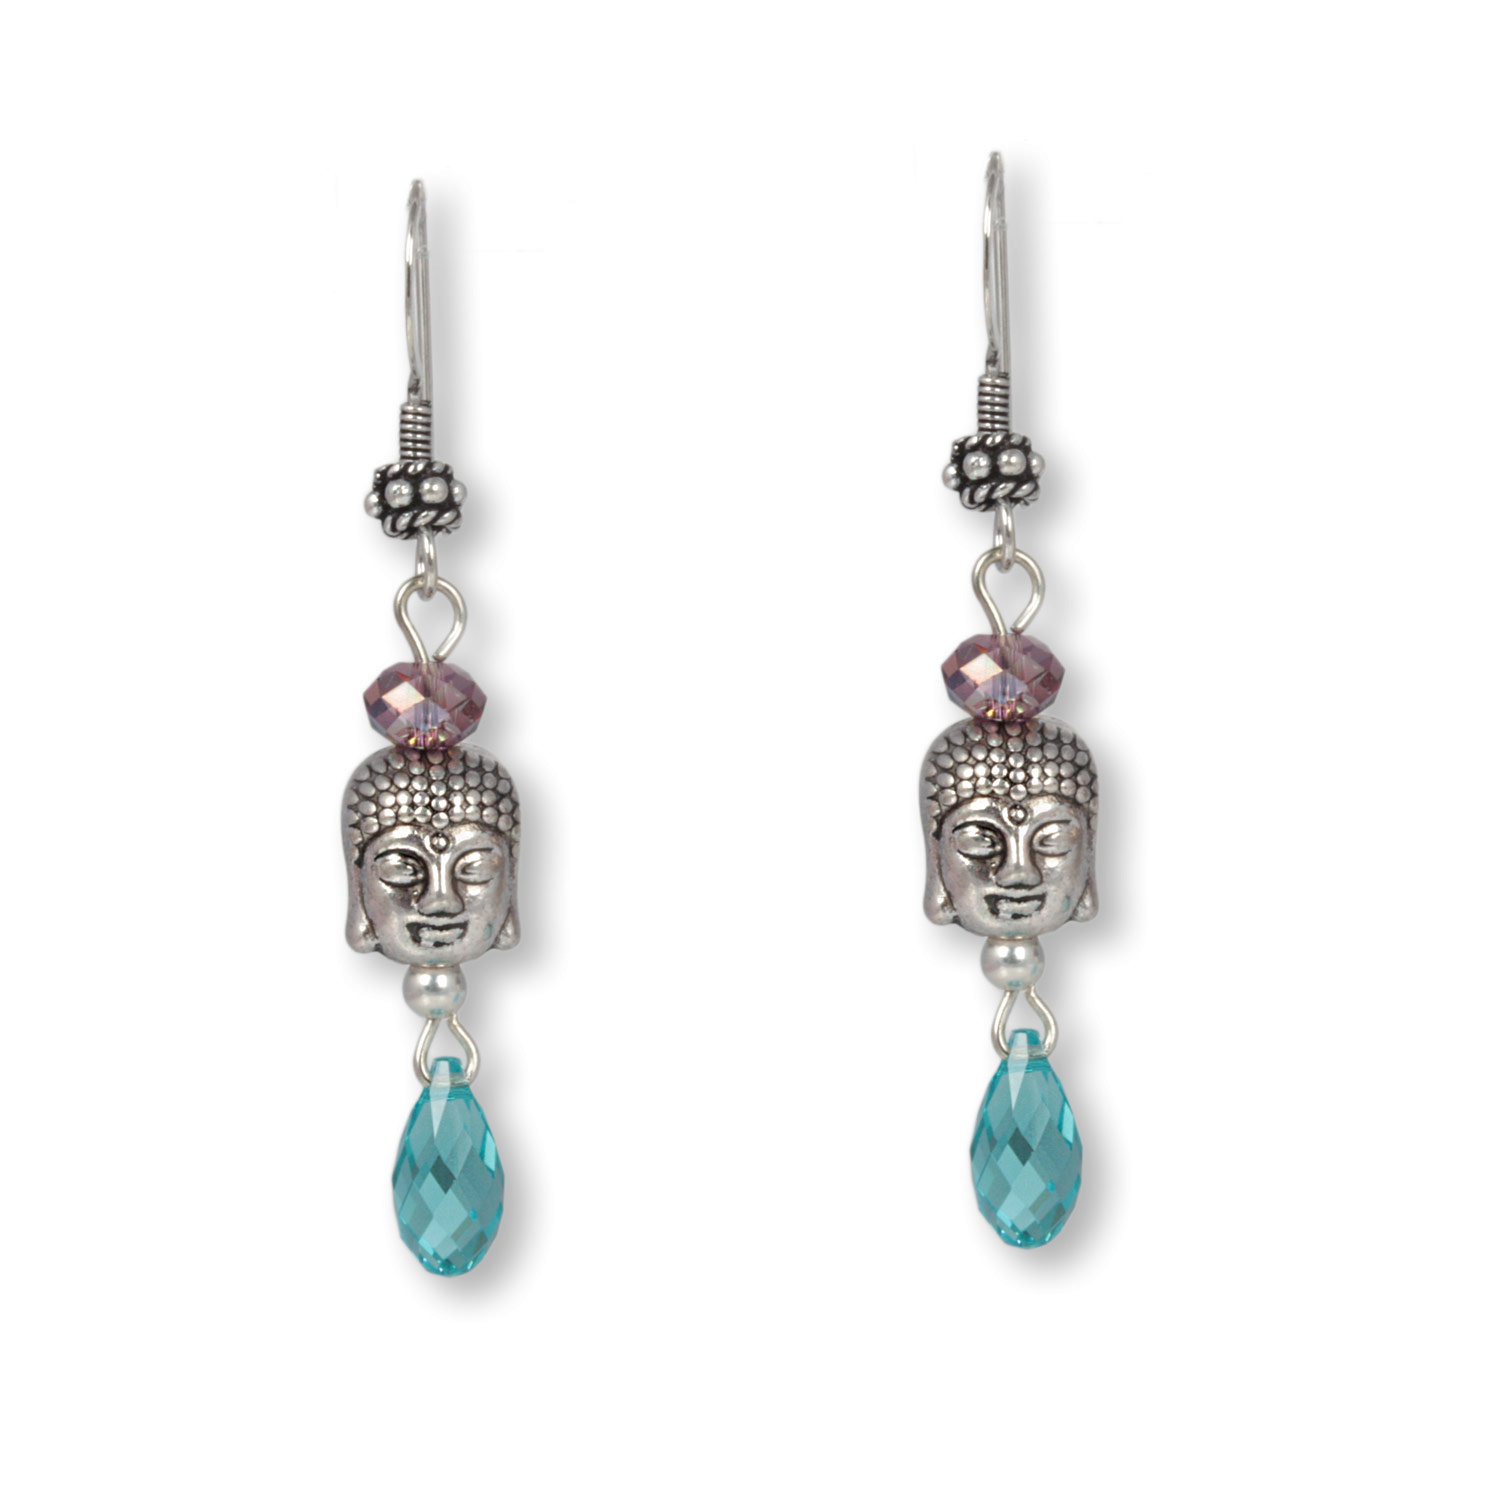 Turquoise-Violet Silver - Buddha earrings with sparkling crystals